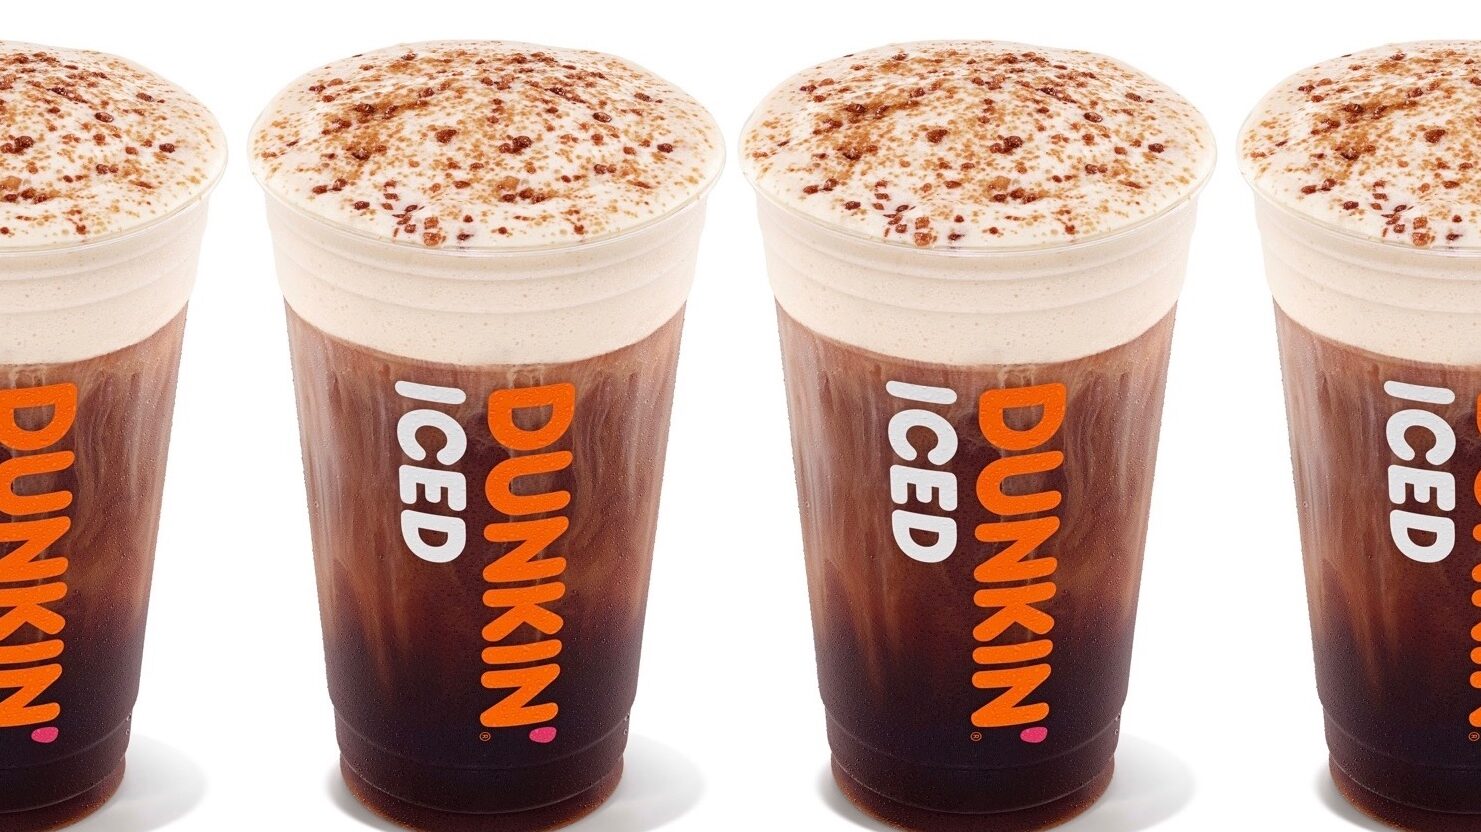 Dunkin's salted caramel cold brew